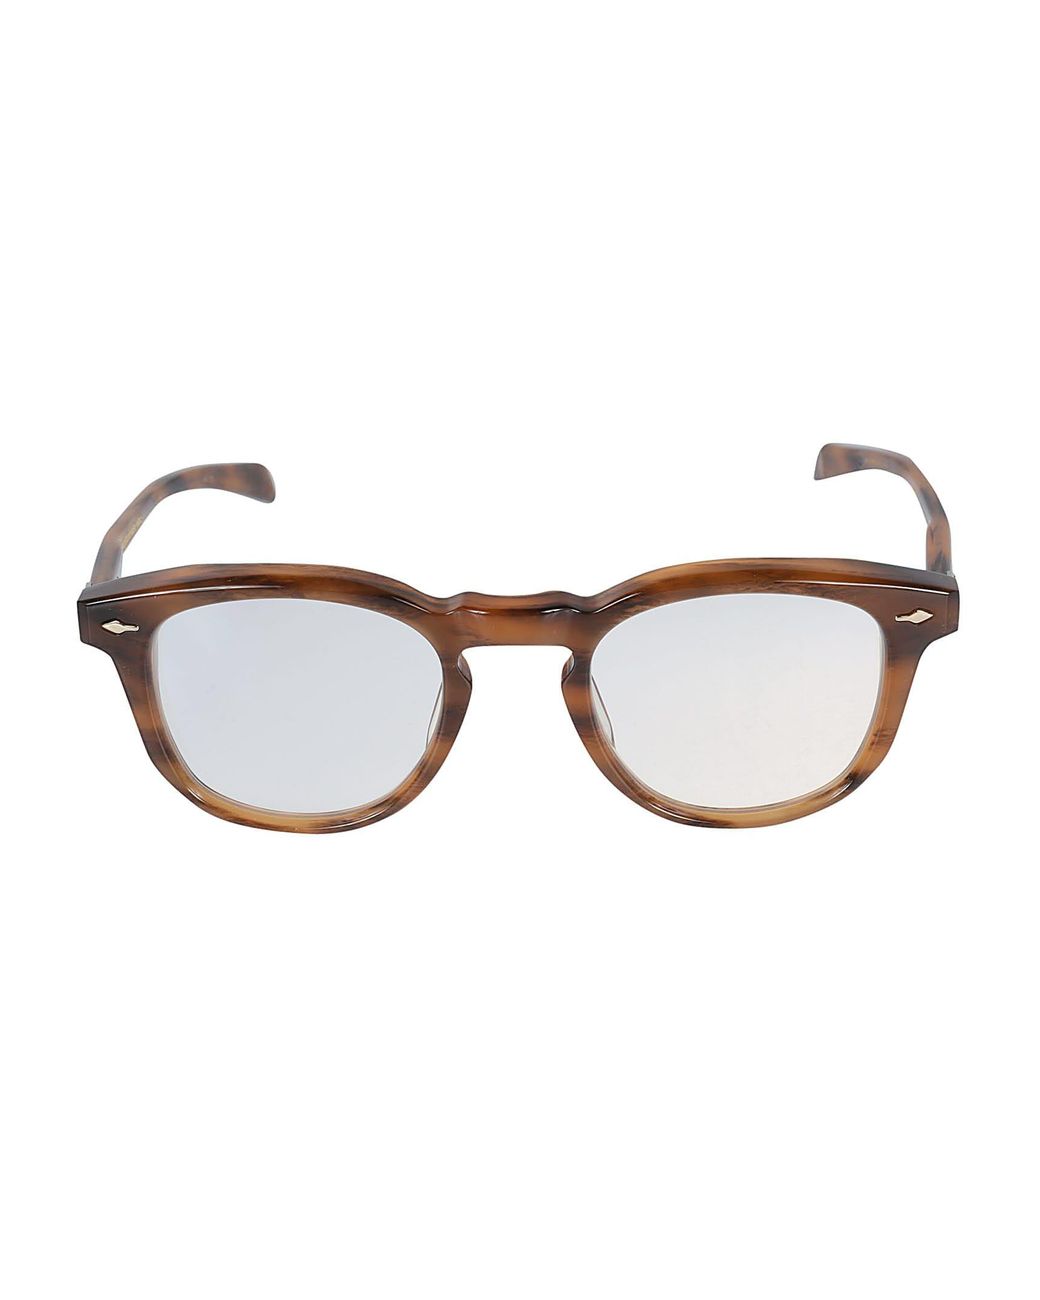 Jacques Marie Mage Logo Round Glasses in Brown | Lyst